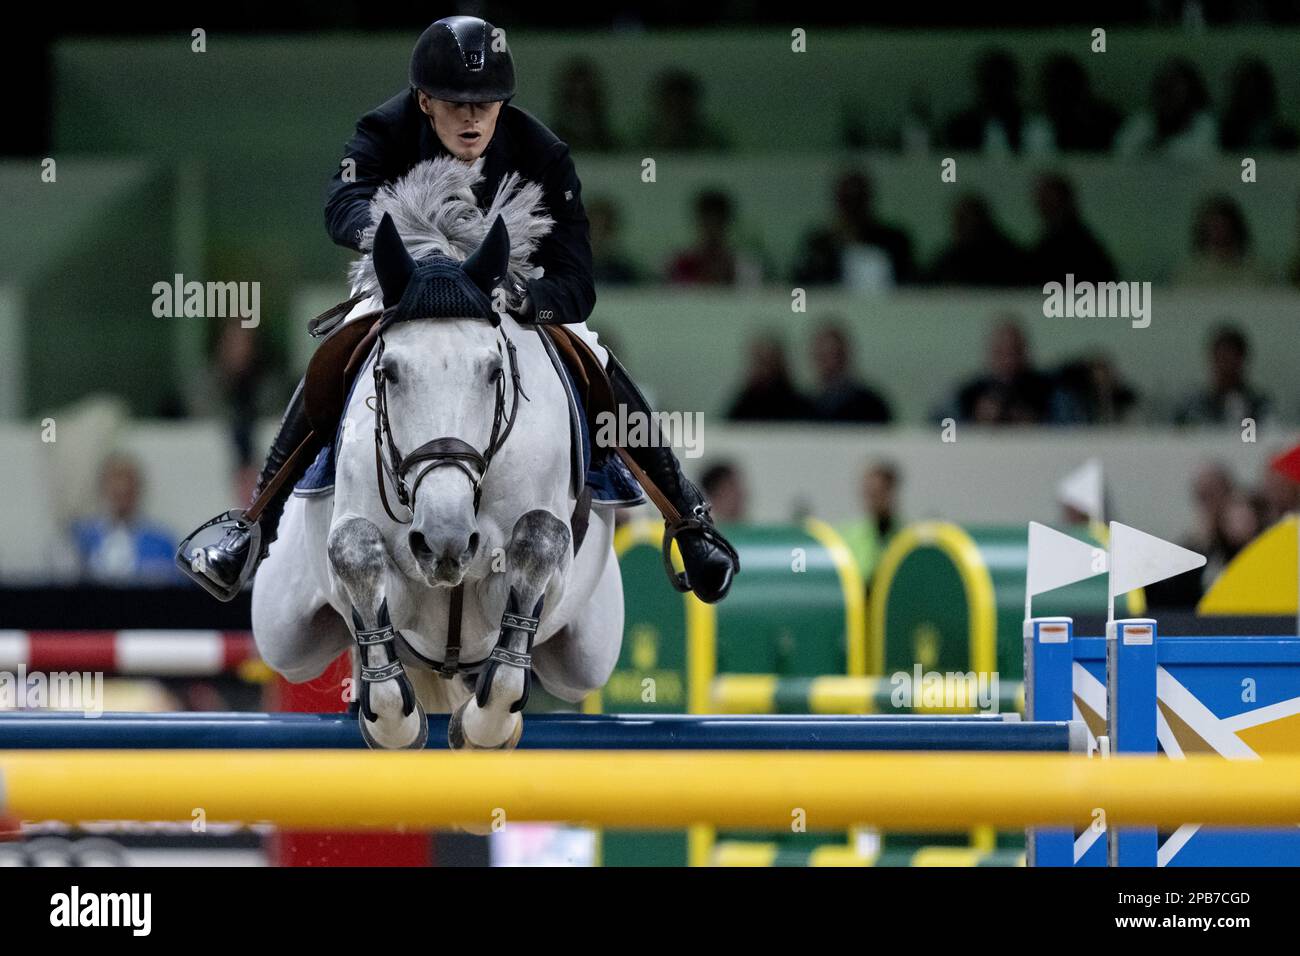 DEN BOSCH - Lars Kersten (NED) on Hallilea in action during the World Cup show jumping, during The Dutch Masters Indoor Brabant Horse Show. ANP SANDER KONING netherlands out - belgium out Stock Photo